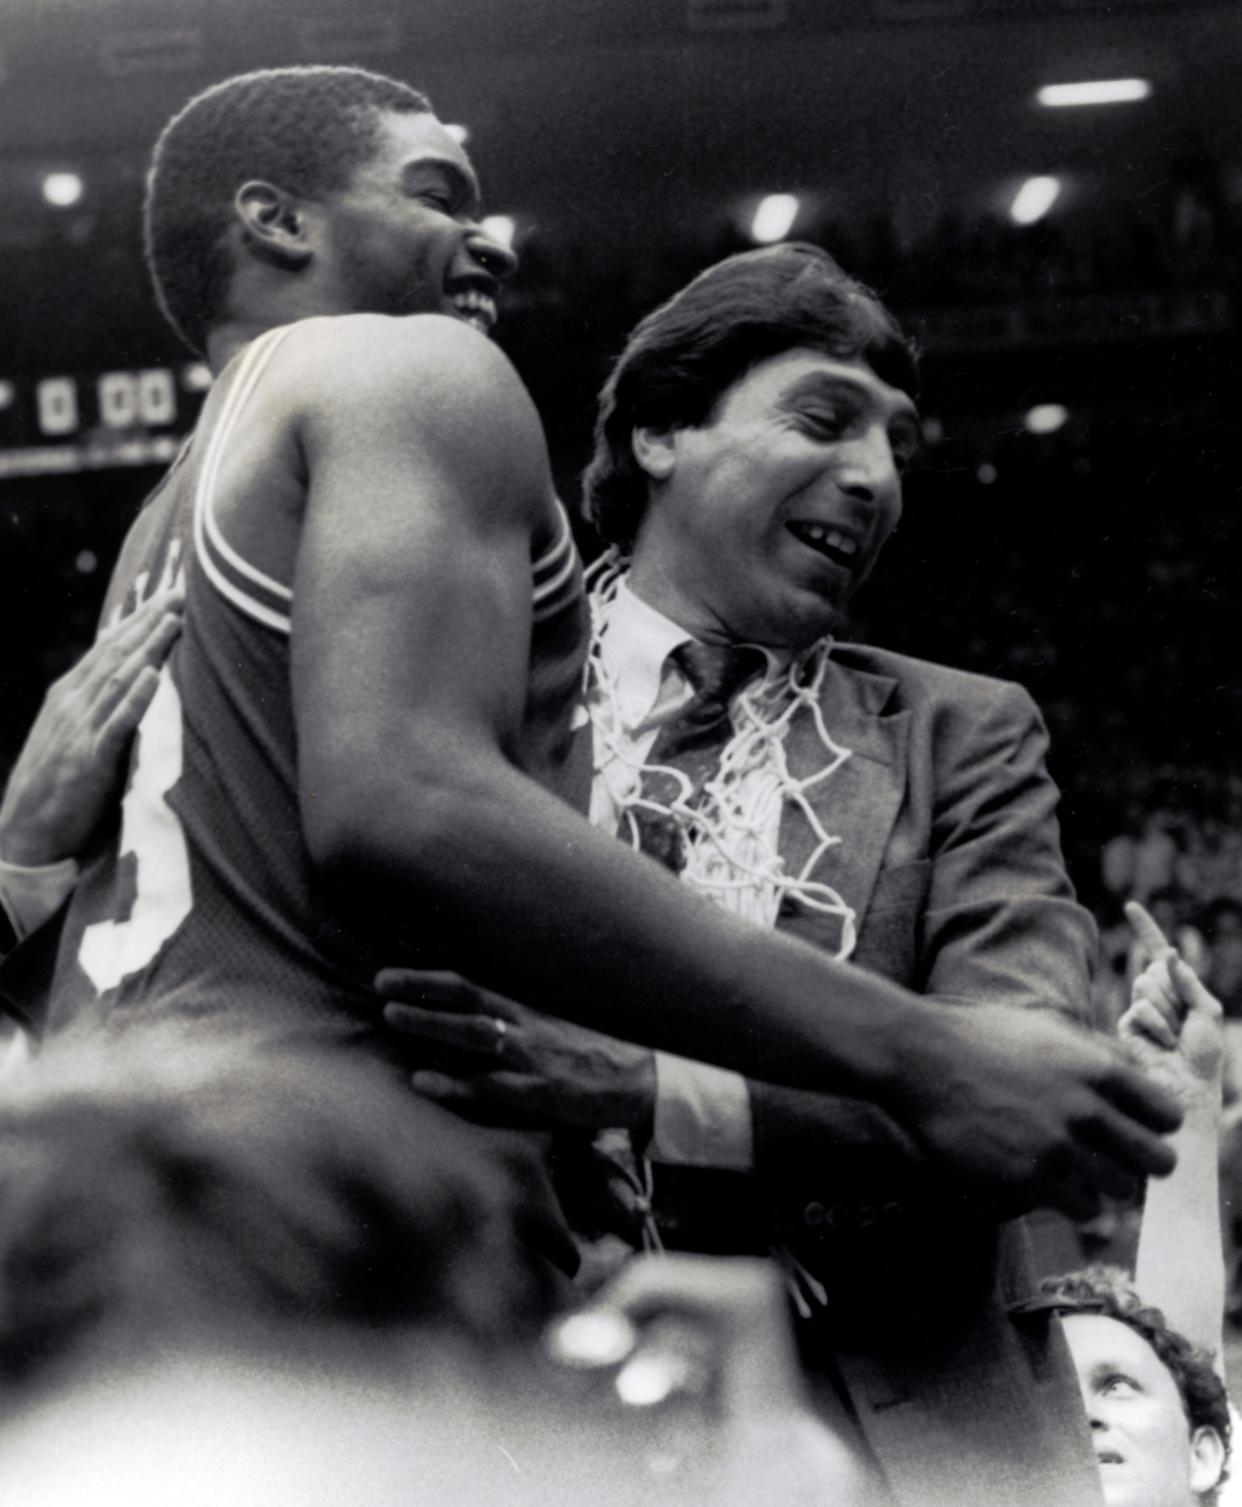 North Carolina State coach Jim Valvano celebrated with Lorenzo Charles in 1983 after the Wolfpack won the national championship with a shocking 54-52 victory over Houston. Charles made the game-winning dunk.